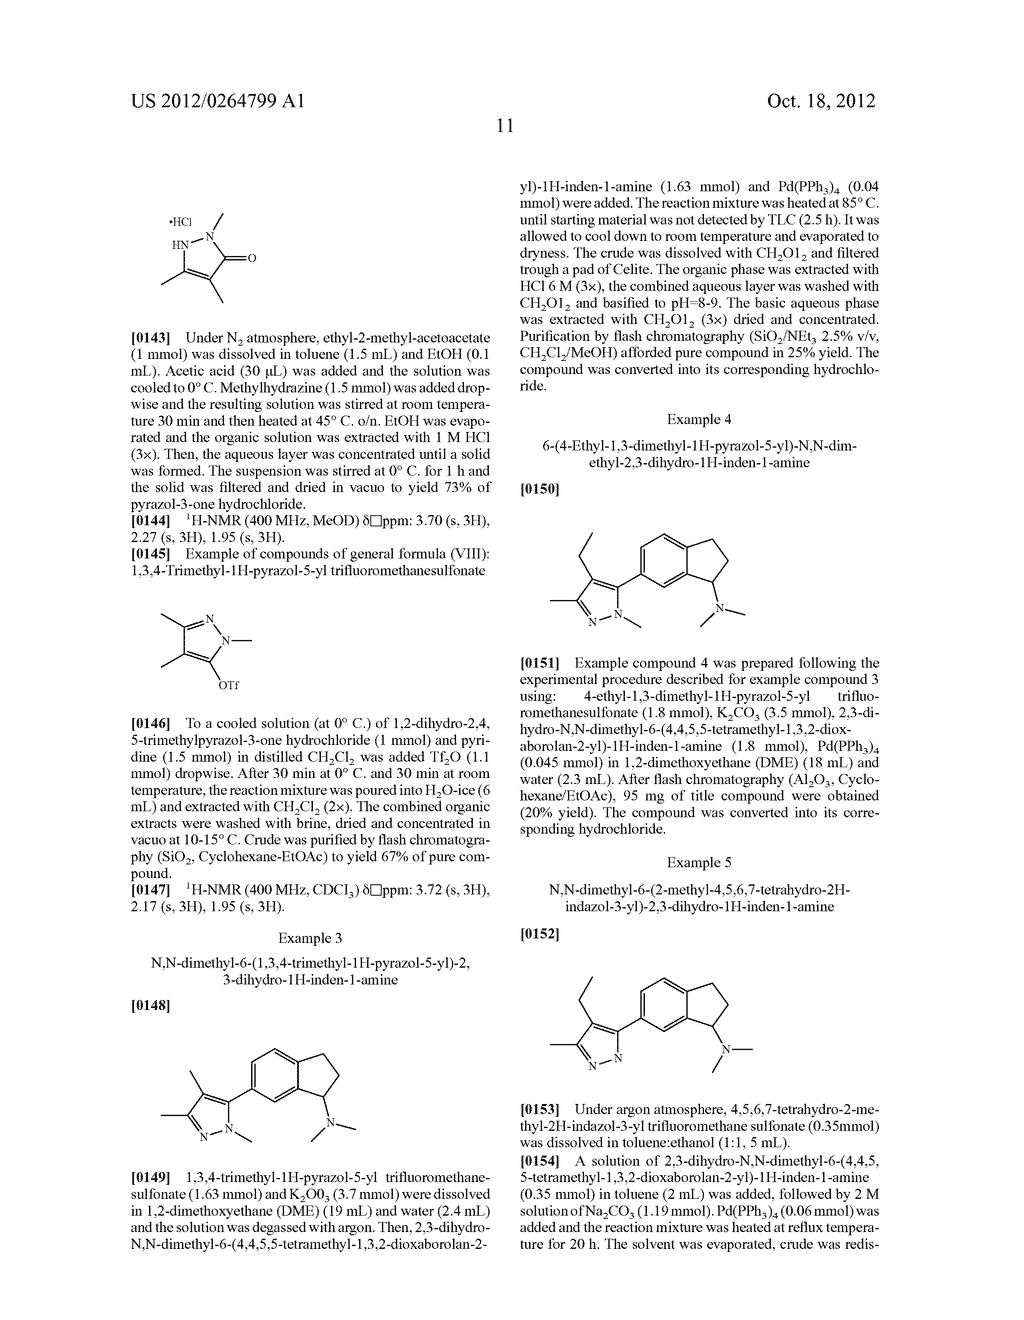 INDANE-AMINE DERIVATIVES, THEIR PREPARATION AND USE AS MEDICAMENTS - diagram, schematic, and image 12